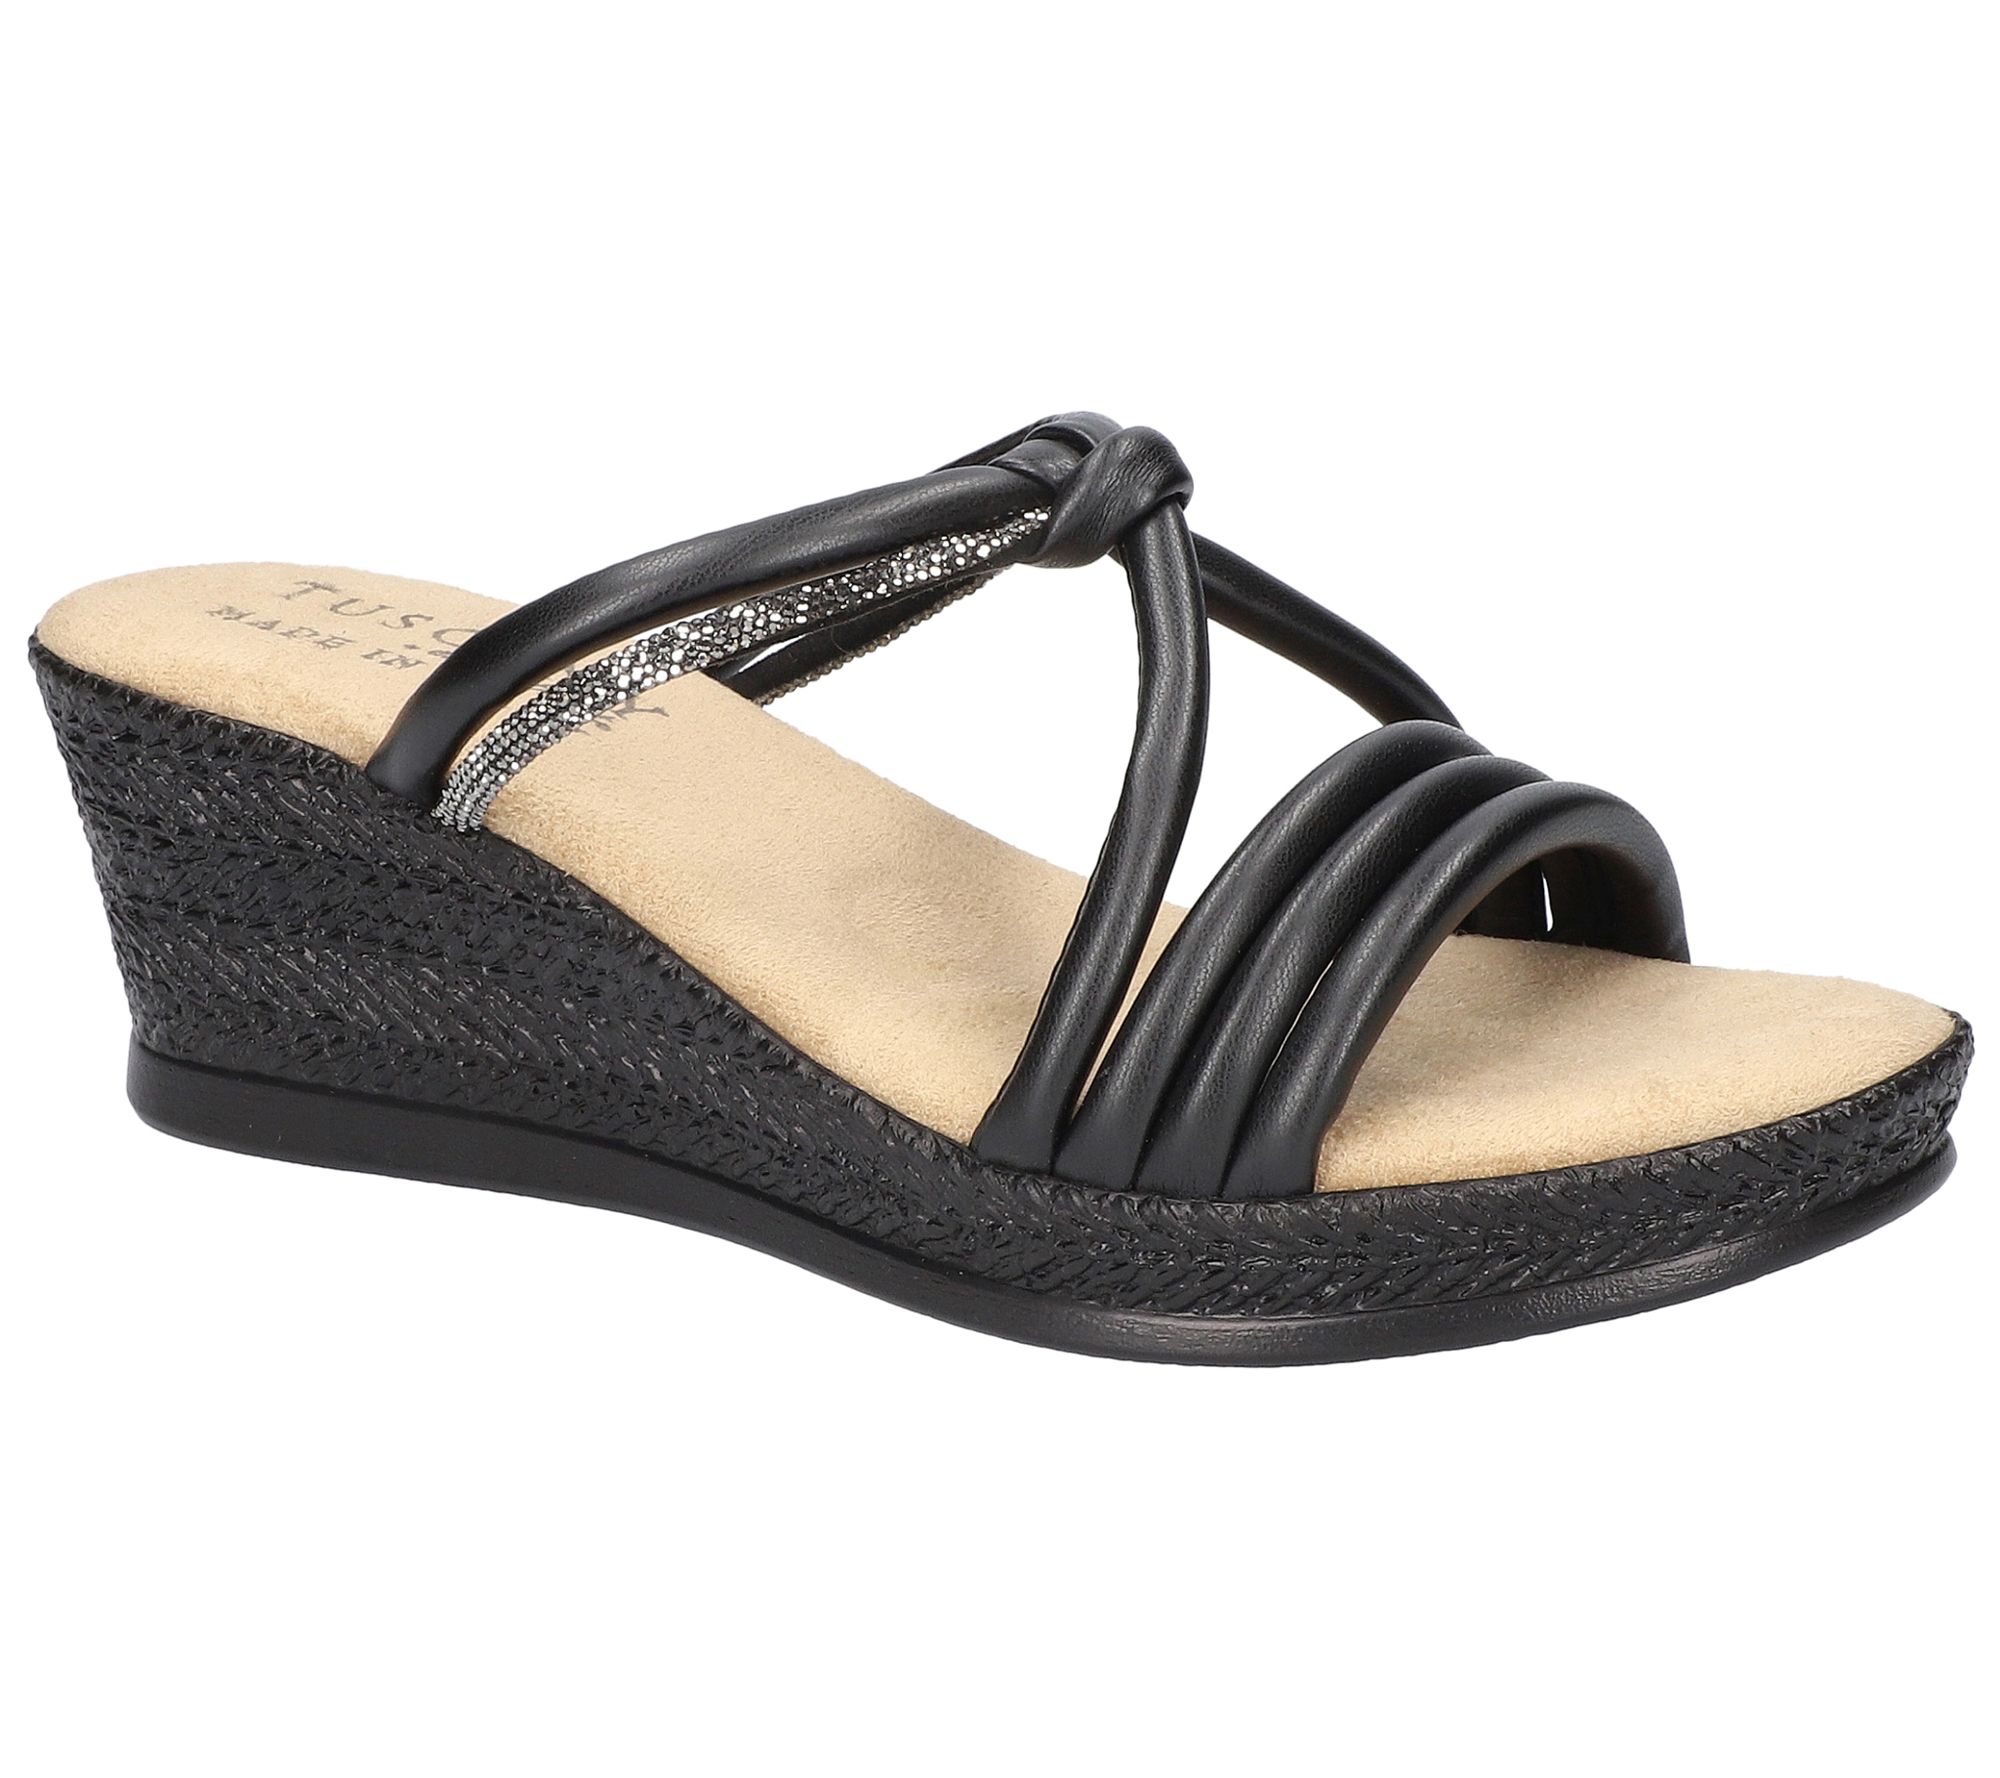 Tuscany by Easy Street Wedge Sandals - Elvera - QVC.com